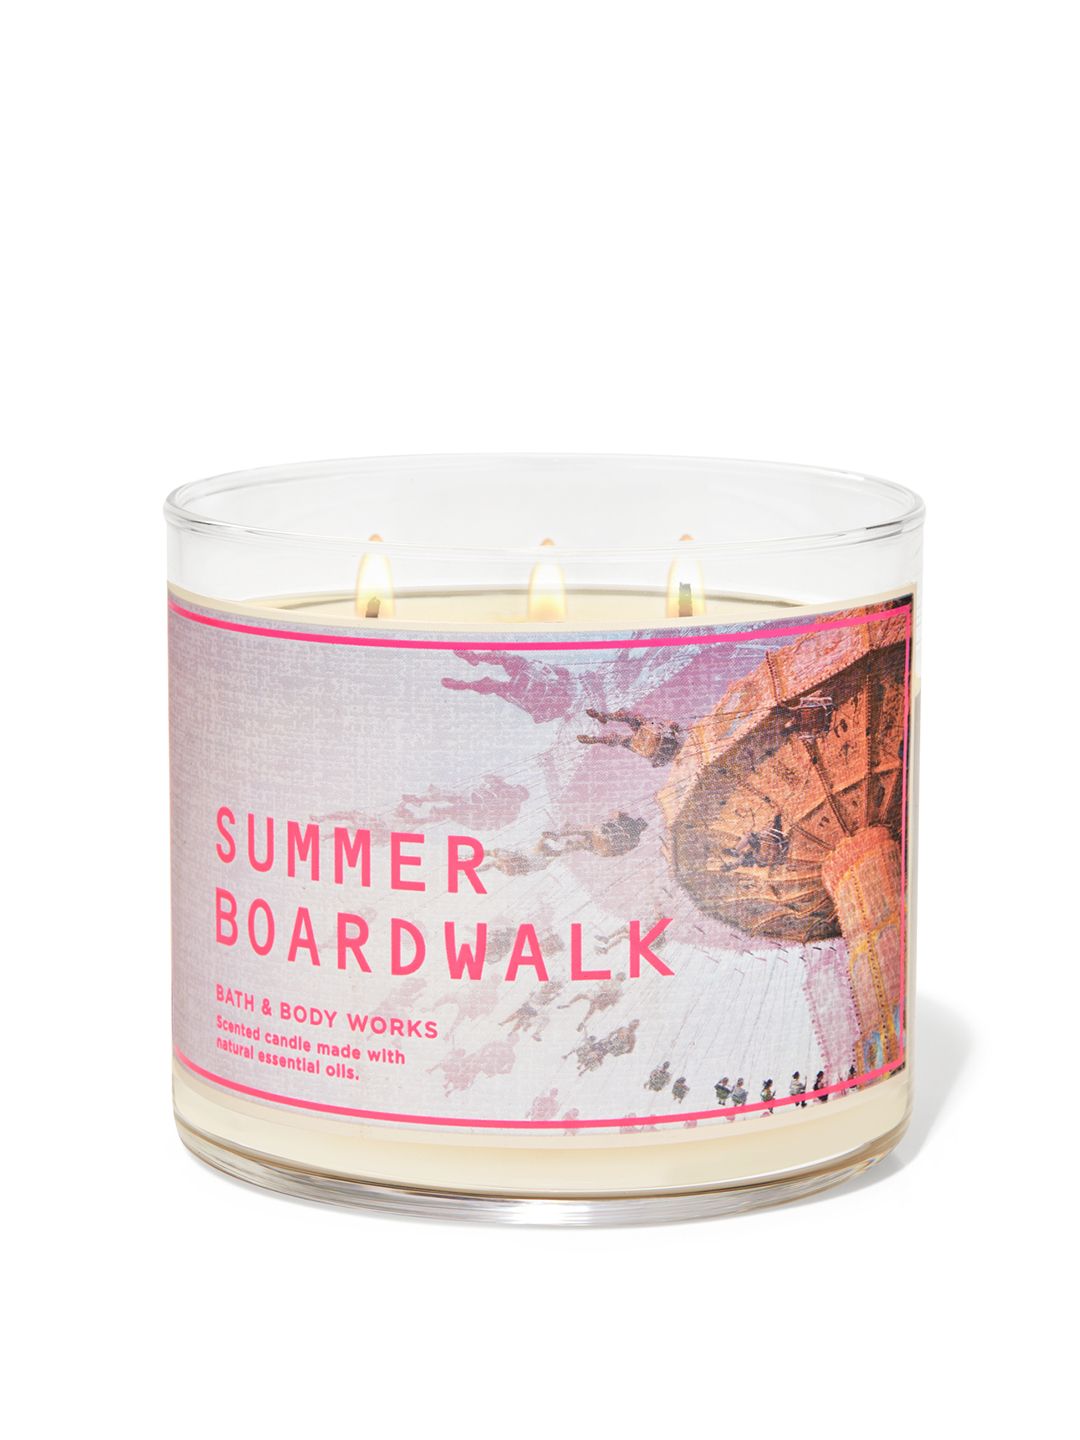 Bath & Body Works Summer Boardwalk 3-Wick Scented Candle with Essential Oils - 411g Price in India